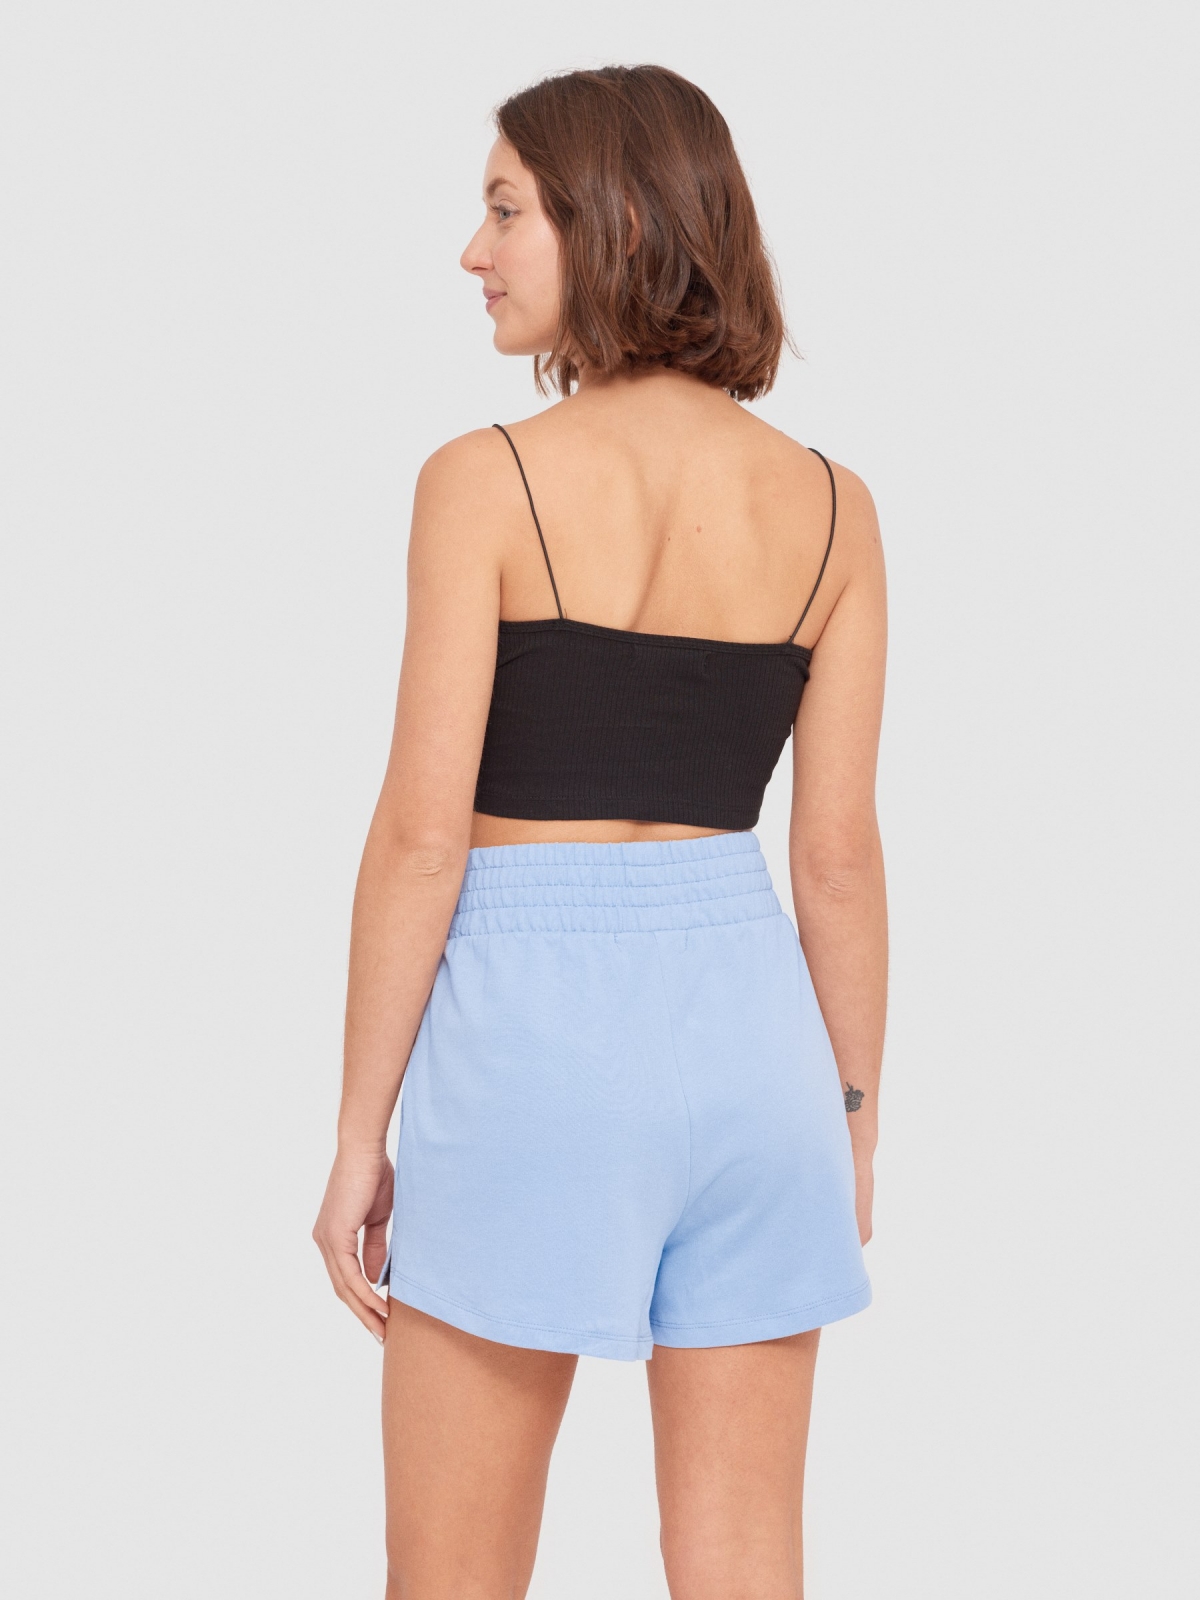 Ribbed strappy top black middle back view